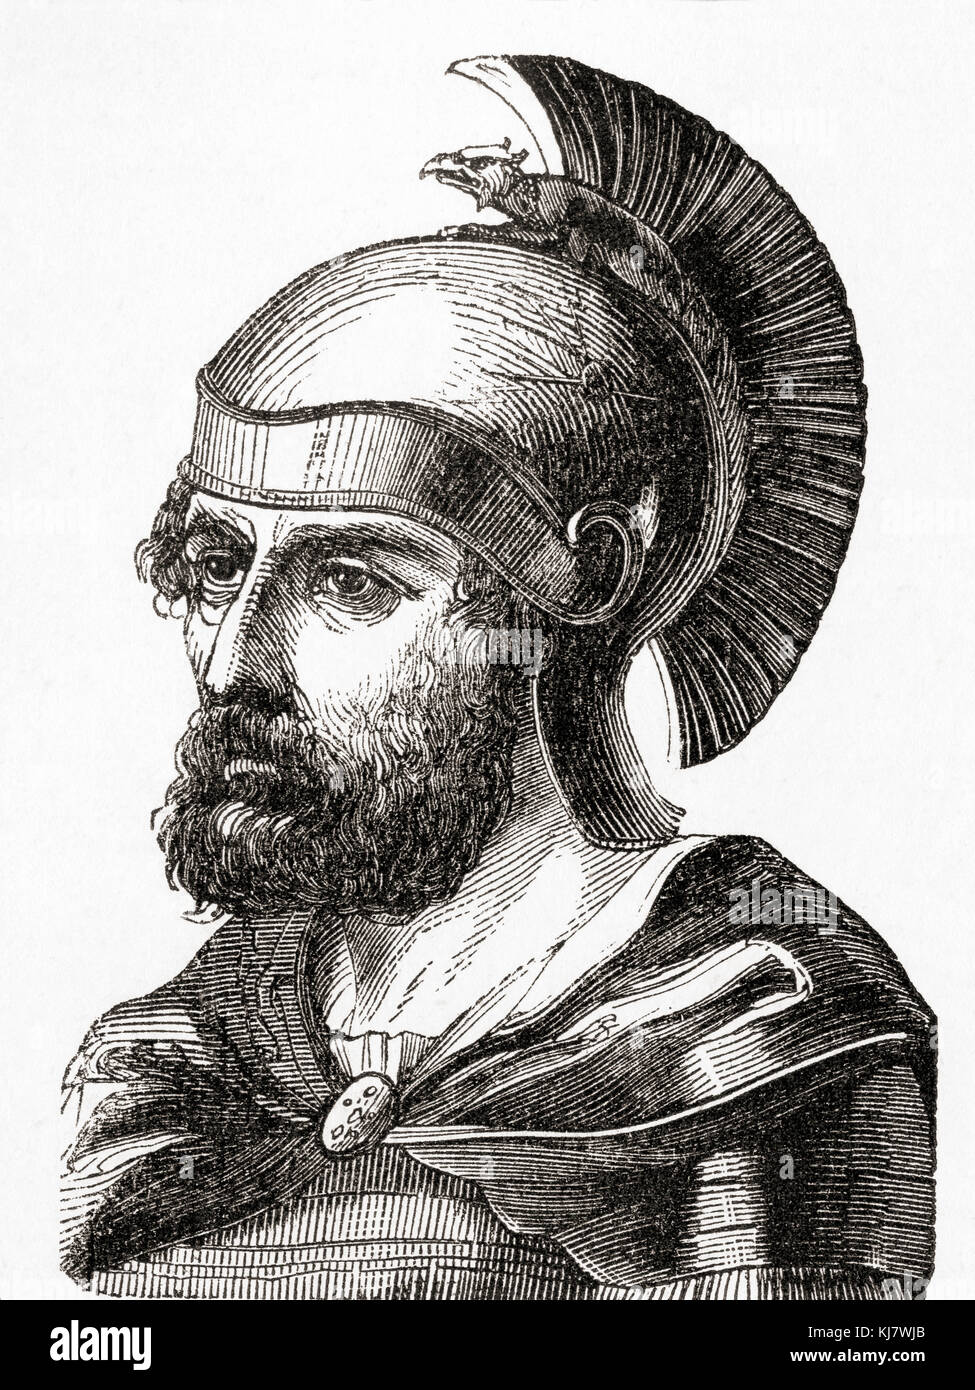 Hamilcar Barca or Barcas, c. 275 – 228 BC. Carthaginian general and statesman and father of Hannibal.  From Ward and Lock's Illustrated History of the World, published c.1882. Stock Photo